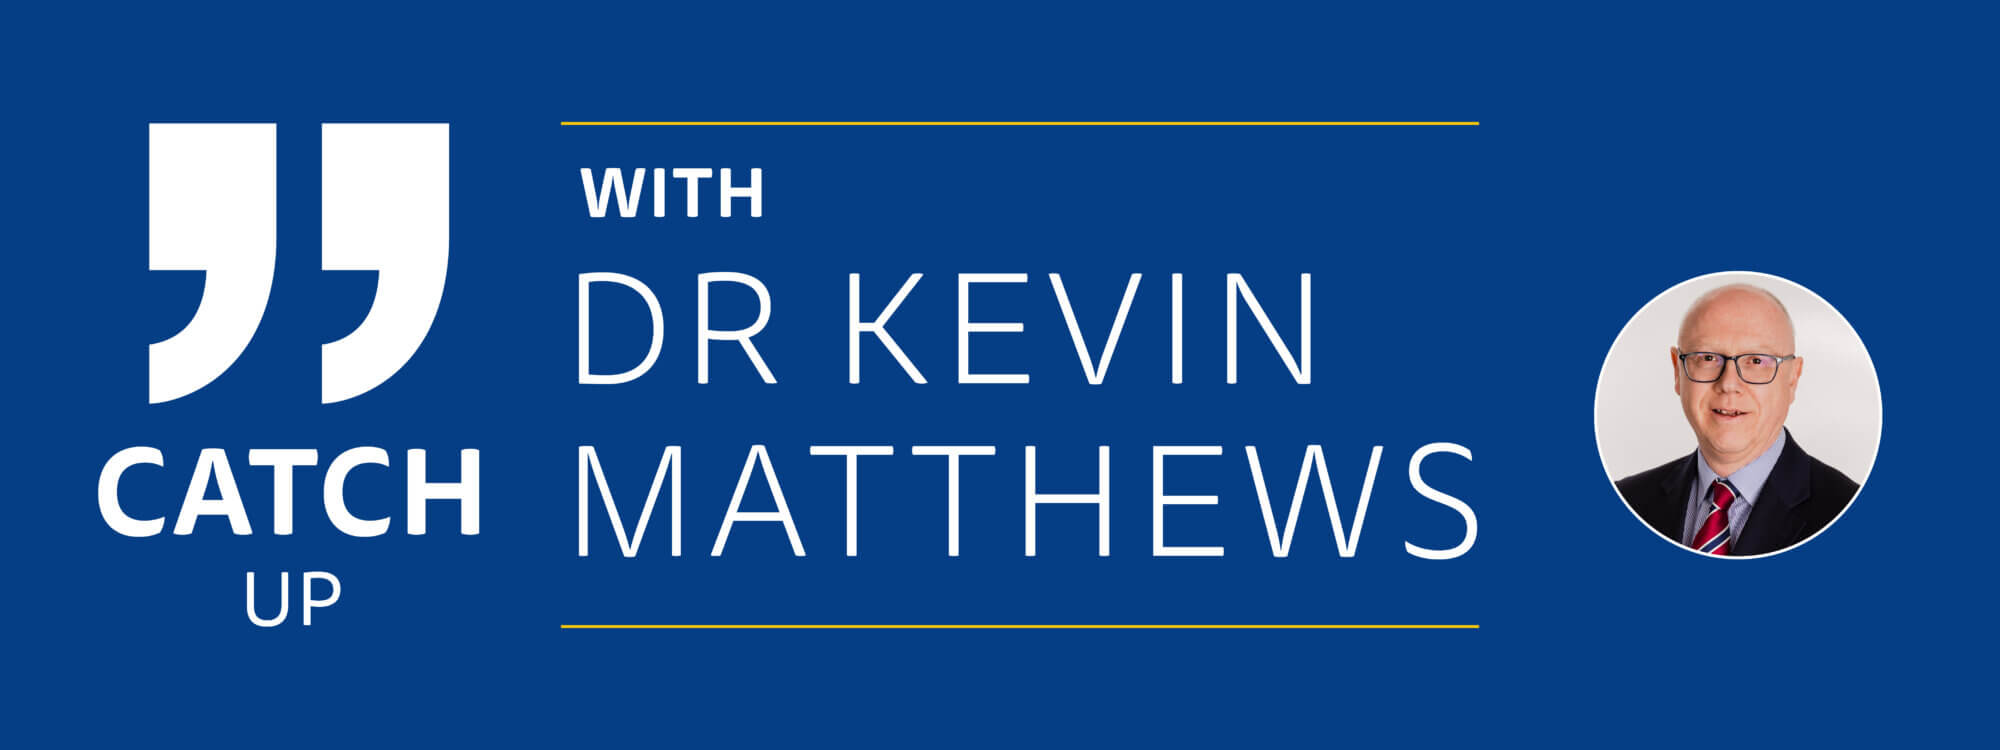 Catch up with Dr Kevin Matthews - Scott Bader CEO